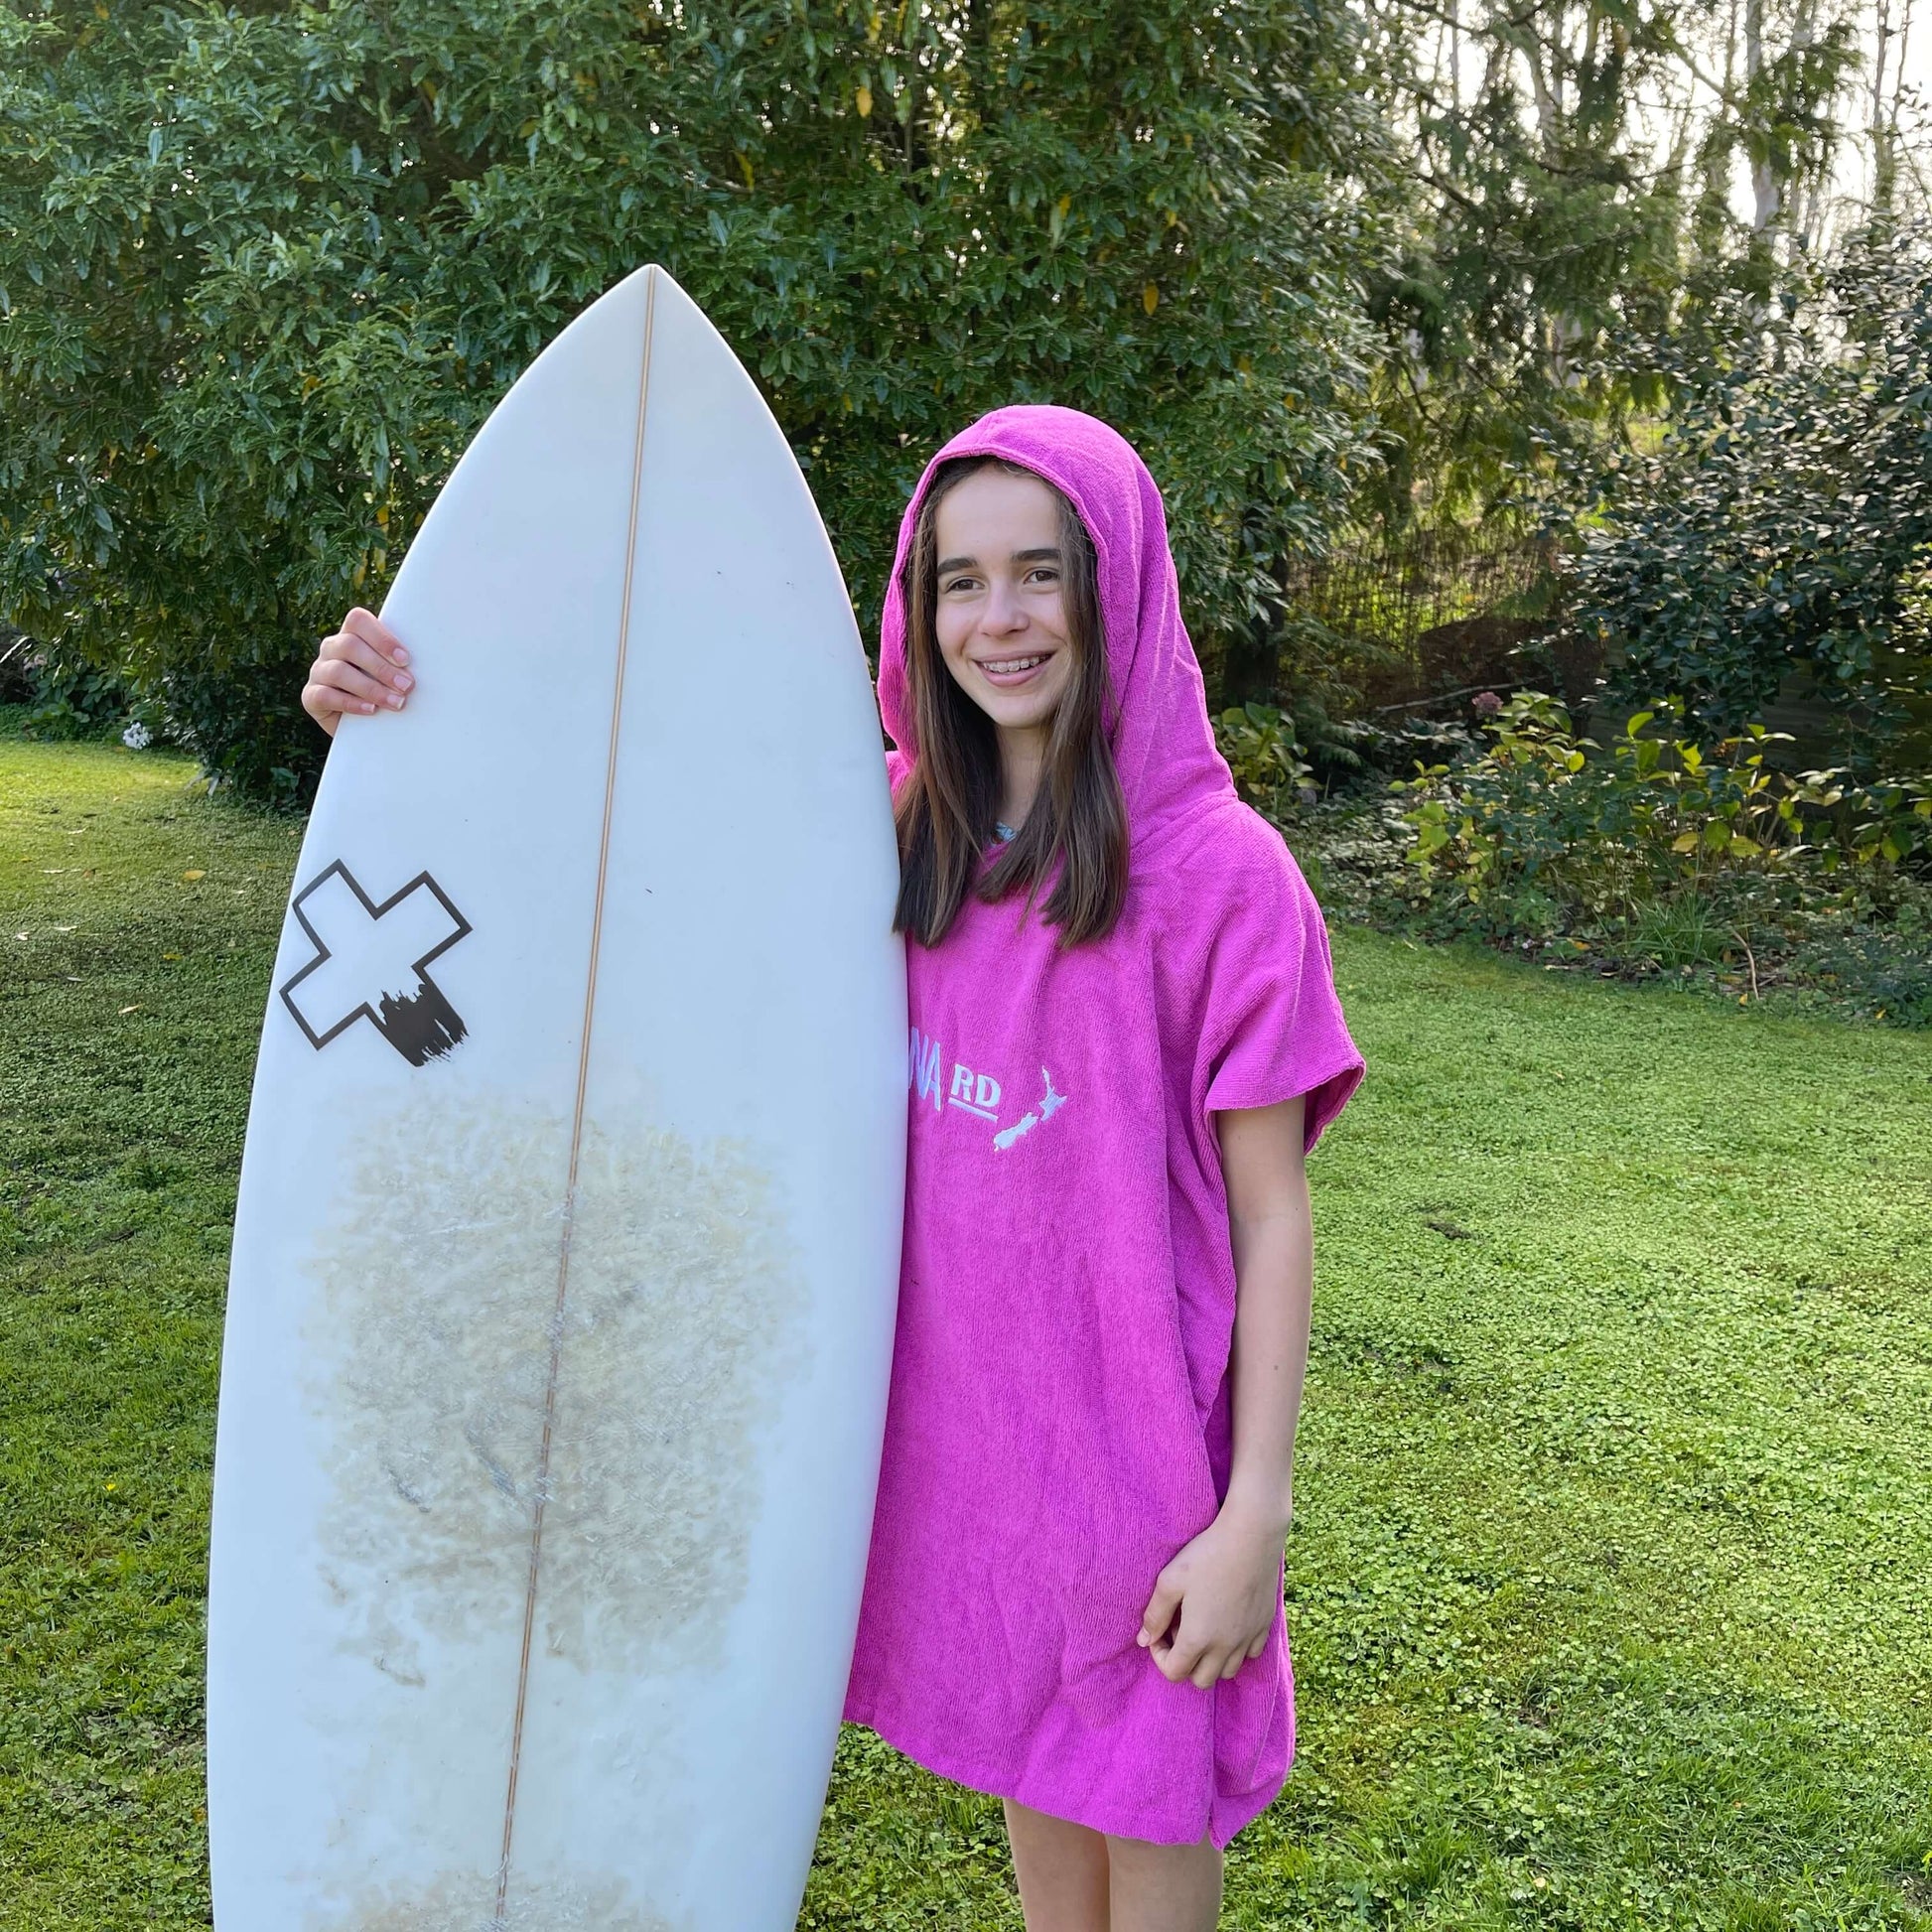 Young girl wearing a bright pink towel hoodie with the words Moana RD on it in white and a map of New Zealand. She is holding a surfboard.